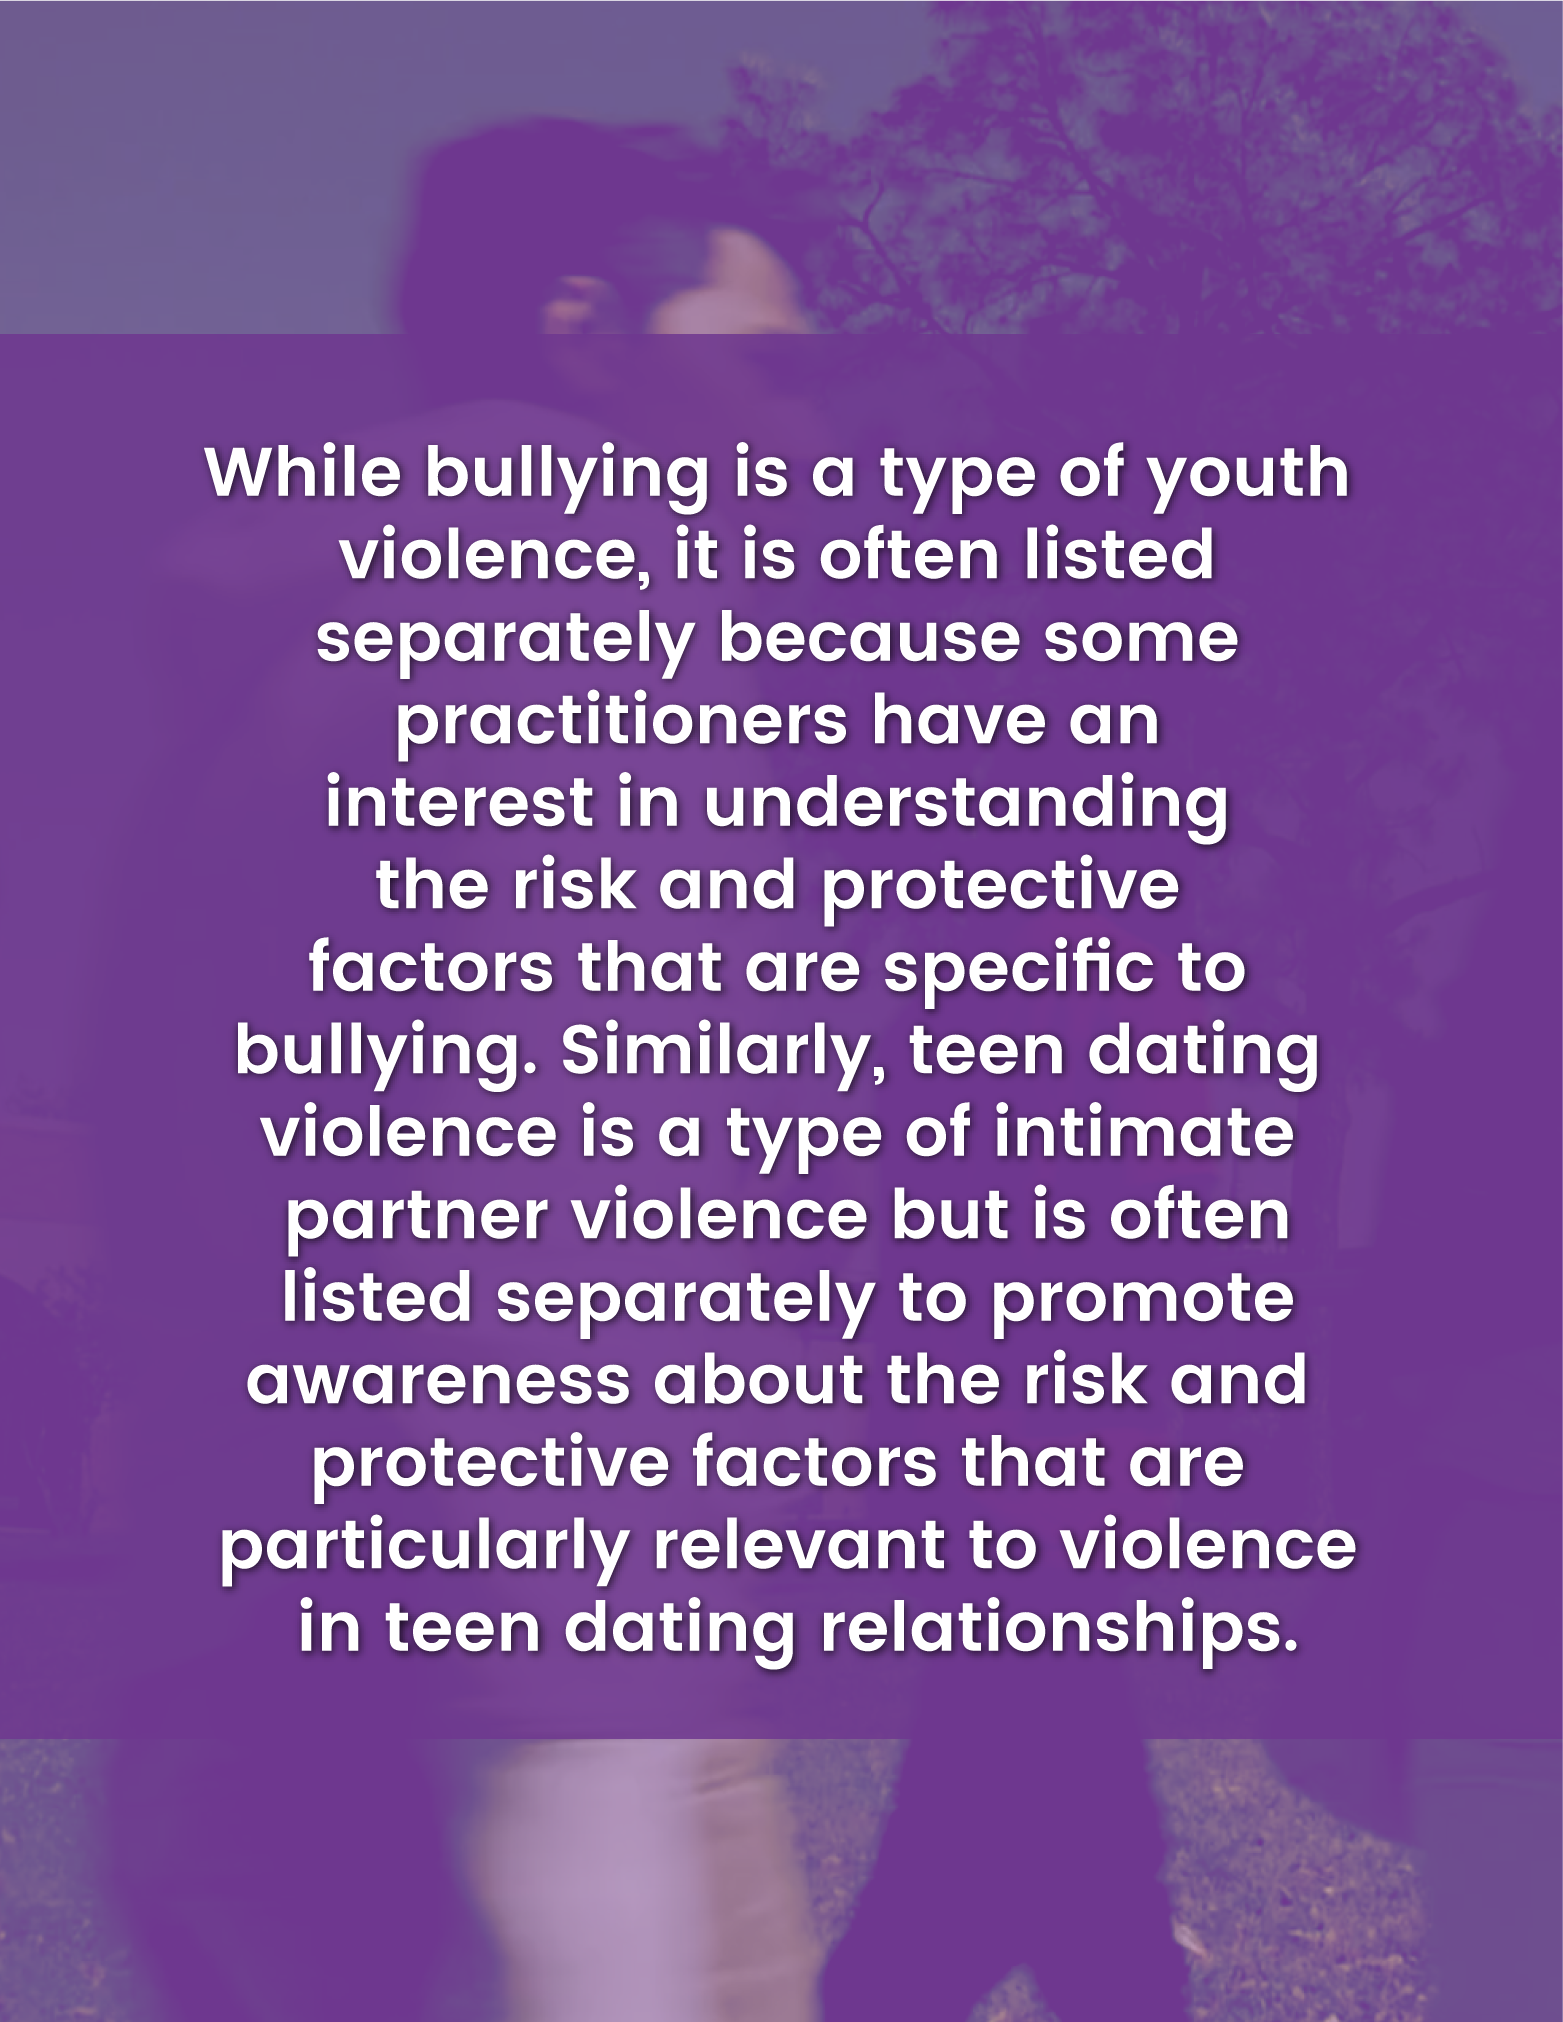 While bullying is a type of youth violence, it is often listed separately because some practitioners have an interest in understanding the risk and protective factors that are specific to bullying. Similarly, teen dating violence is a type of intimate partner violence but is often listed separately to promote awareness about the risk and protective factors that are particularly relevant to violence in teen dating relationships.